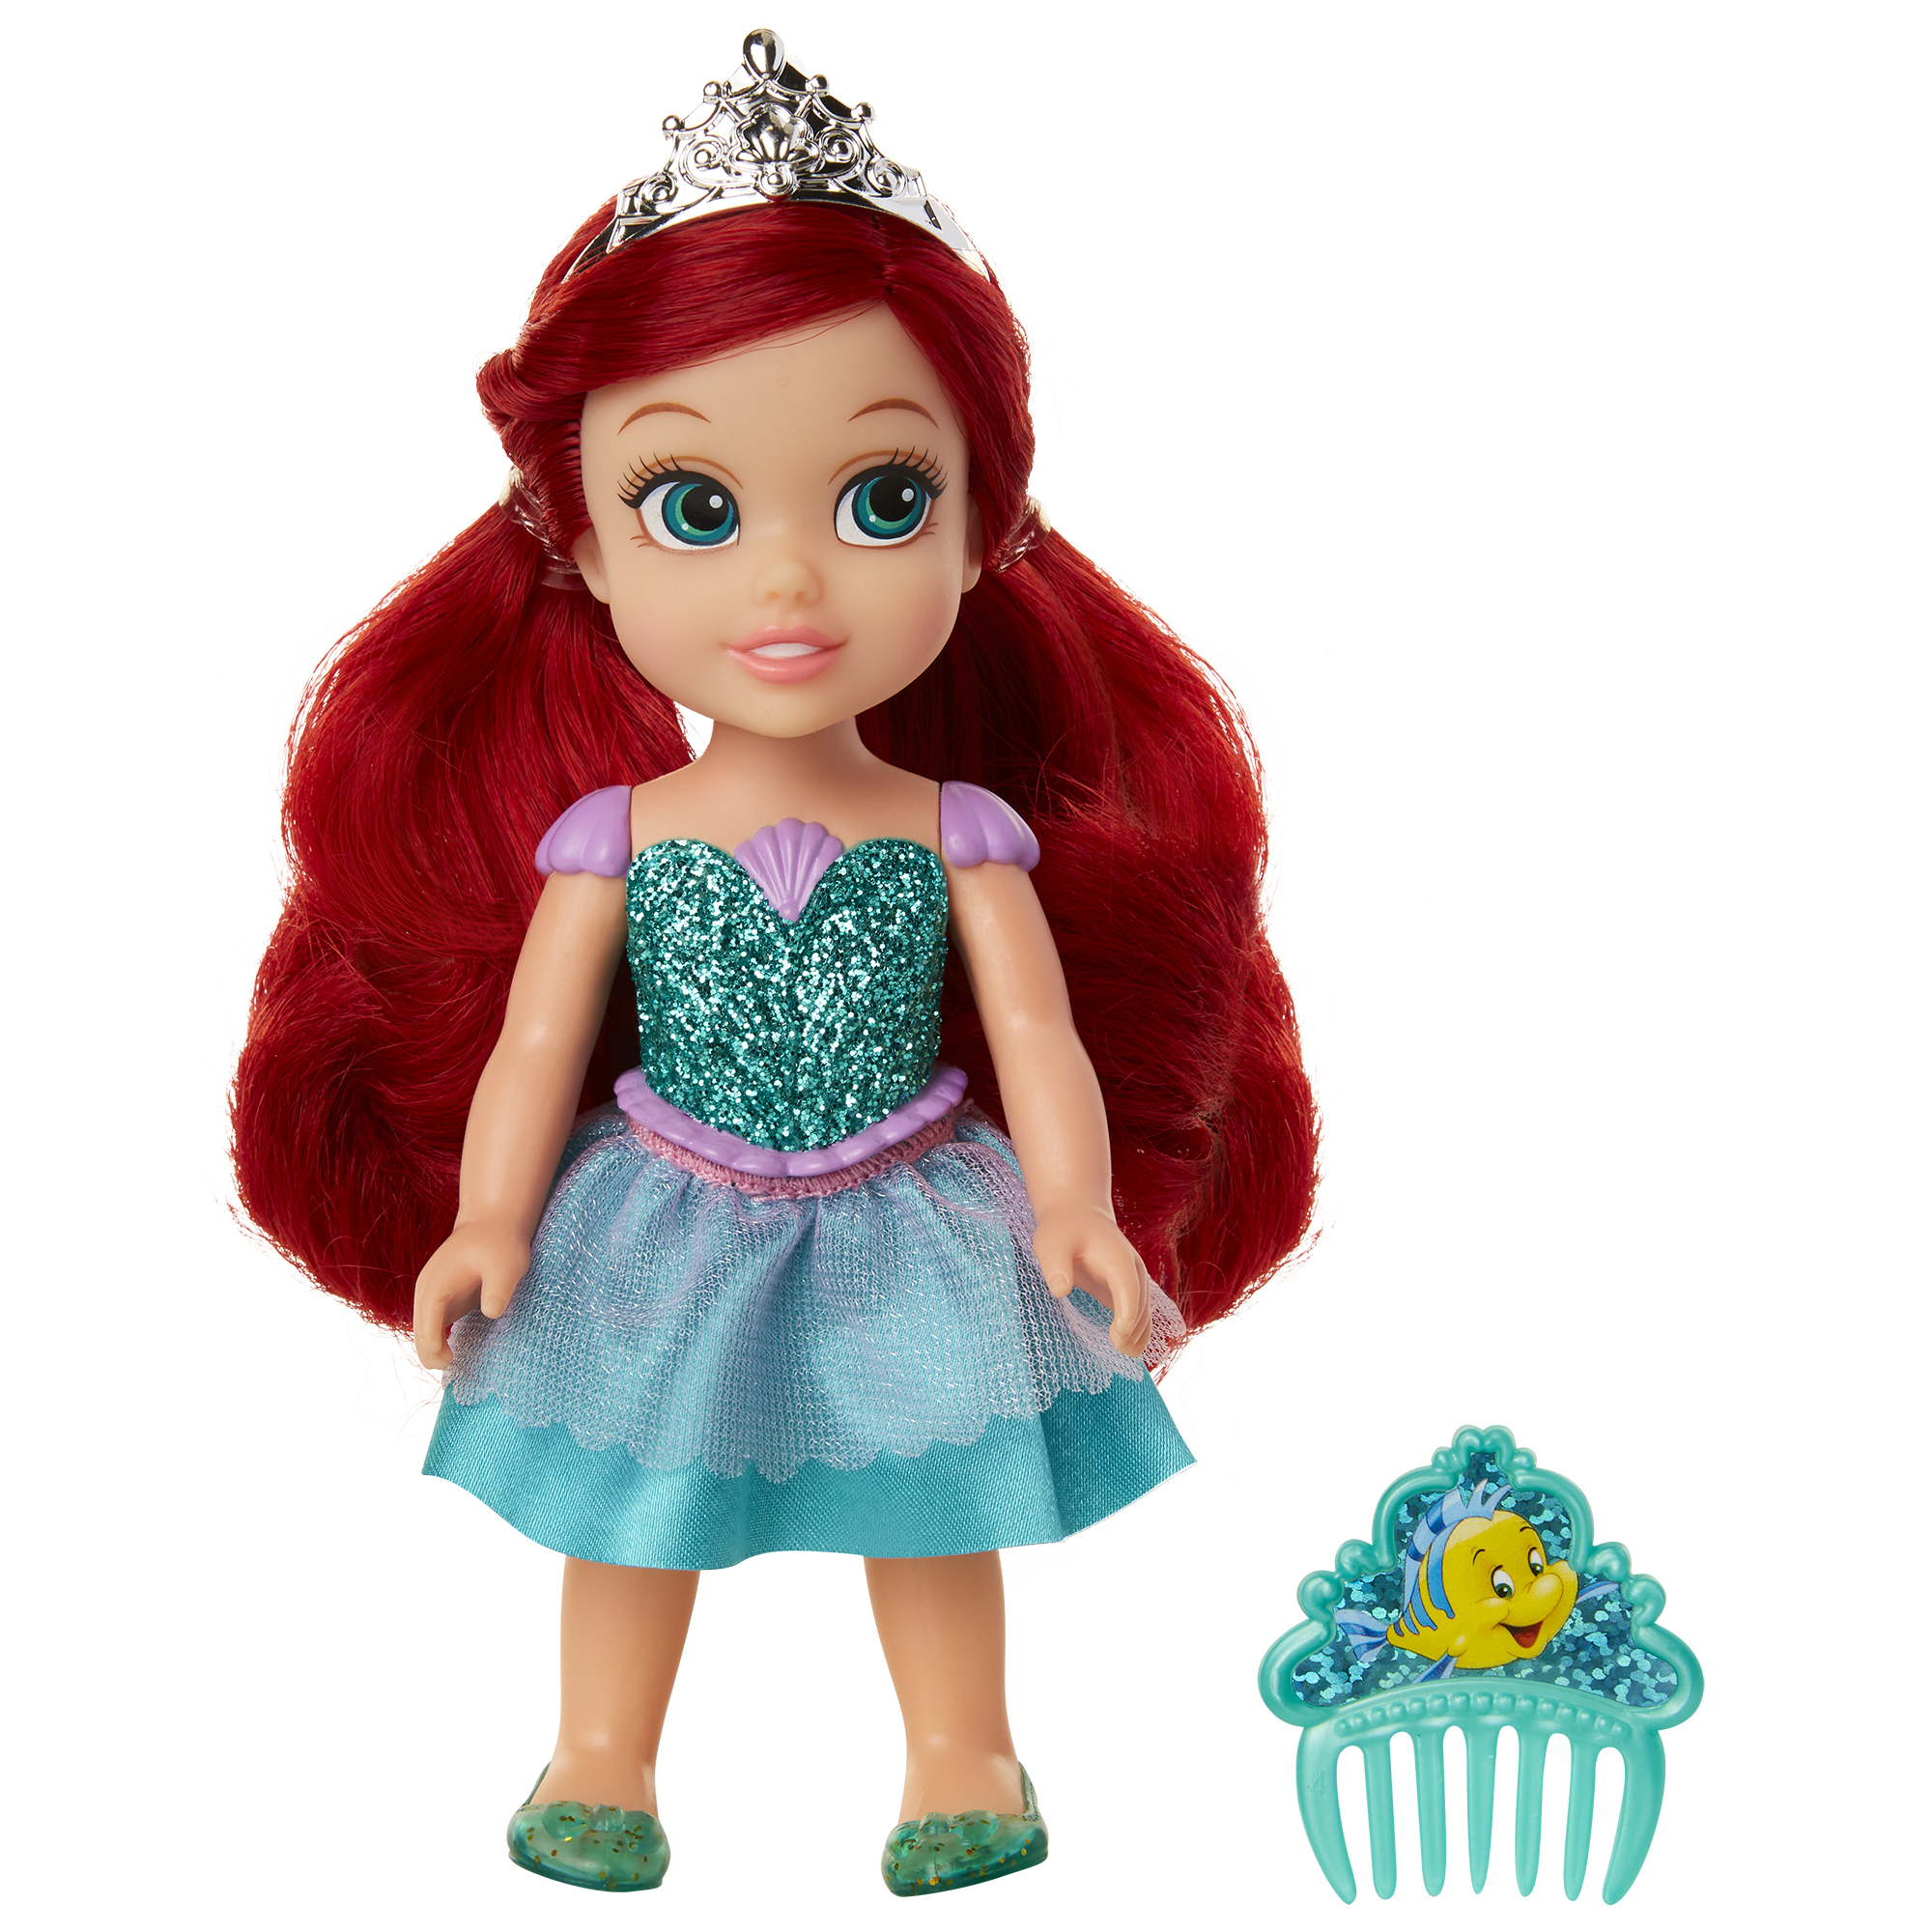 Tall for sale online Disney Princess Toddler Ariel Doll 14 In